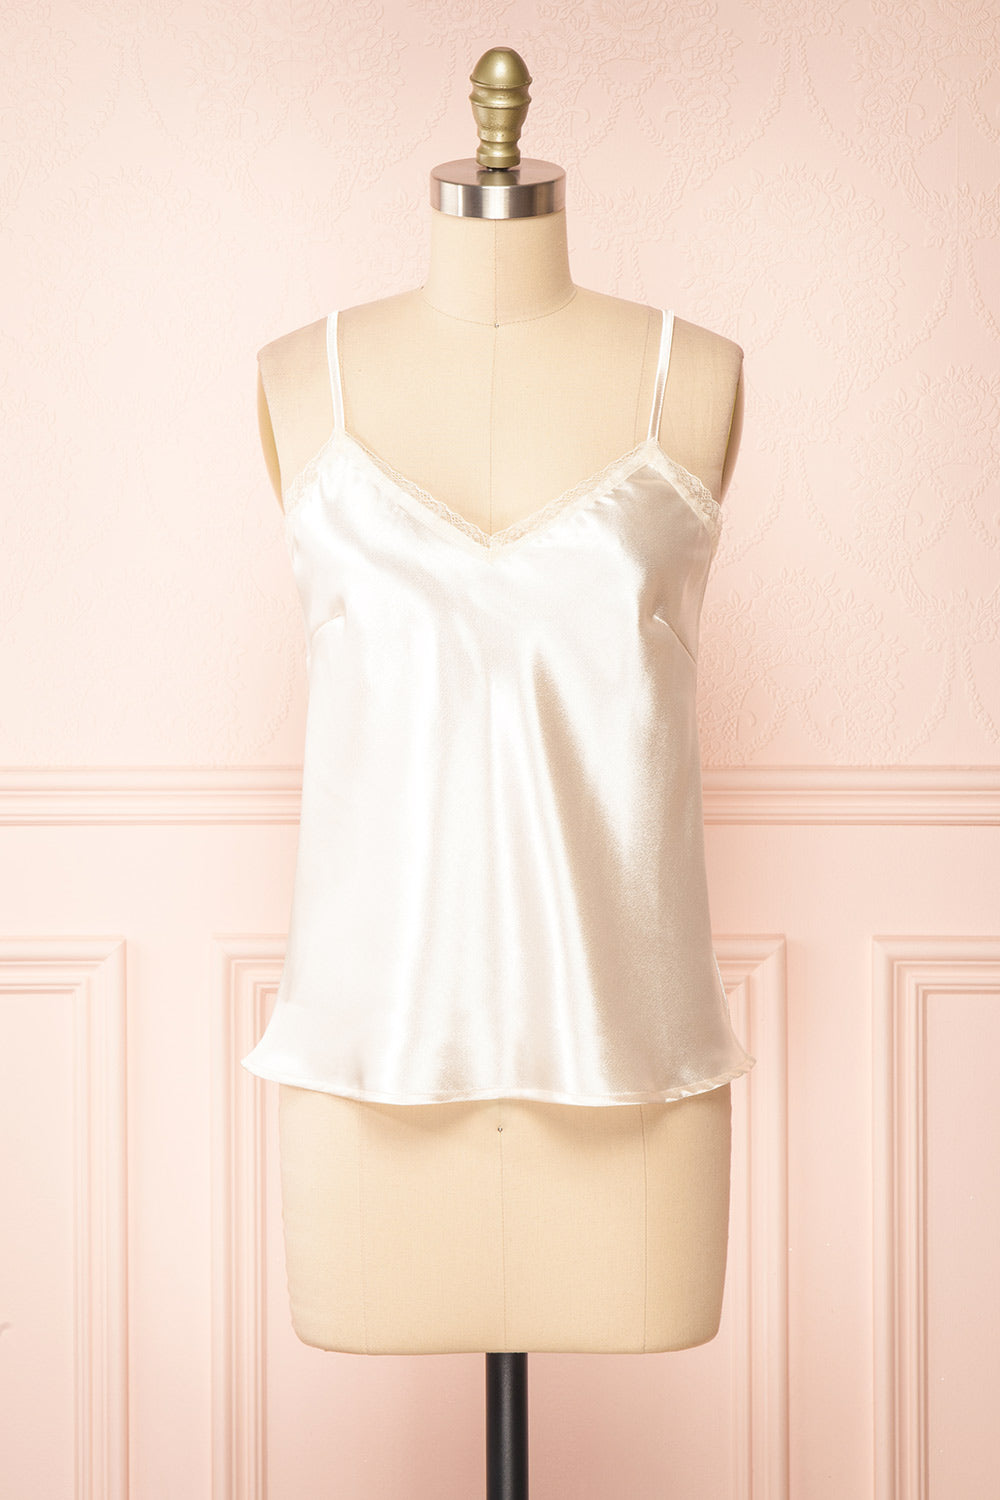 Azula Ivory Satin Cami Top w/ Lace Trim | Boutique 1861 front view